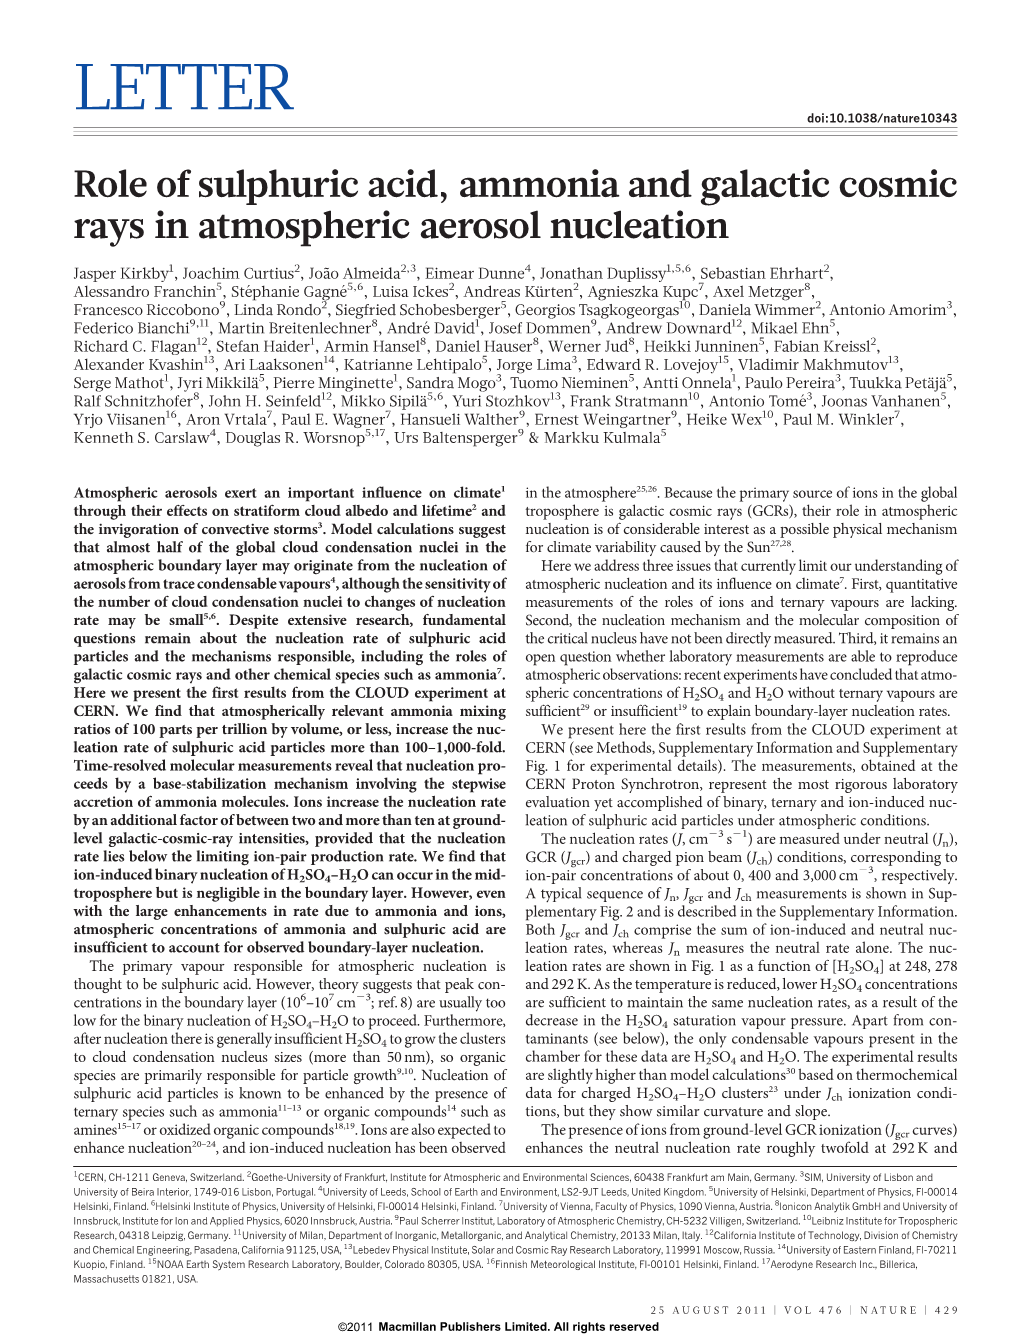 Role of Sulphuric Acid, Ammonia and Galactic Cosmic Rays in Atmospheric Aerosol Nucleation